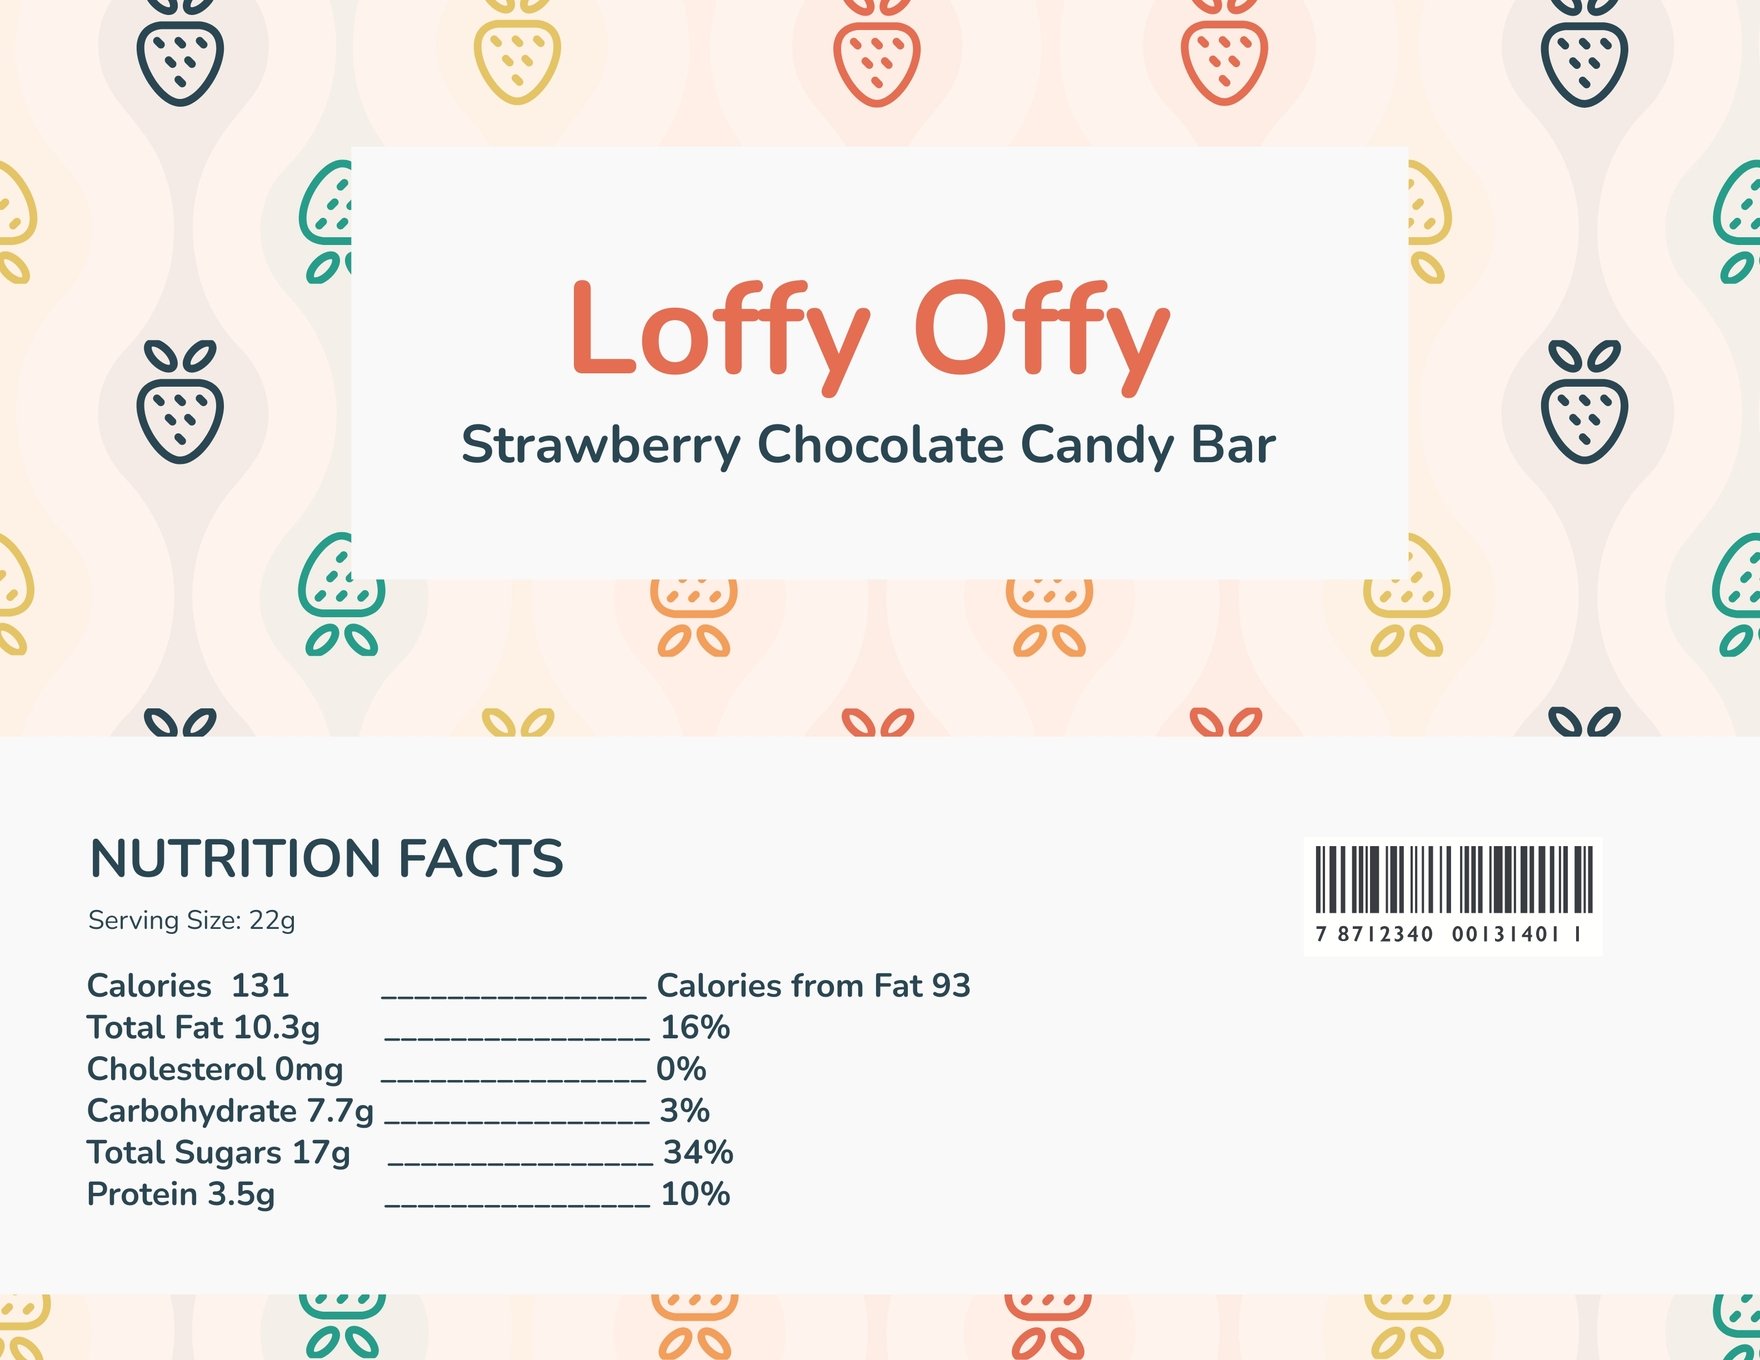 Free Candy Bar Wrapper Template in Word, Illustrator, PSD